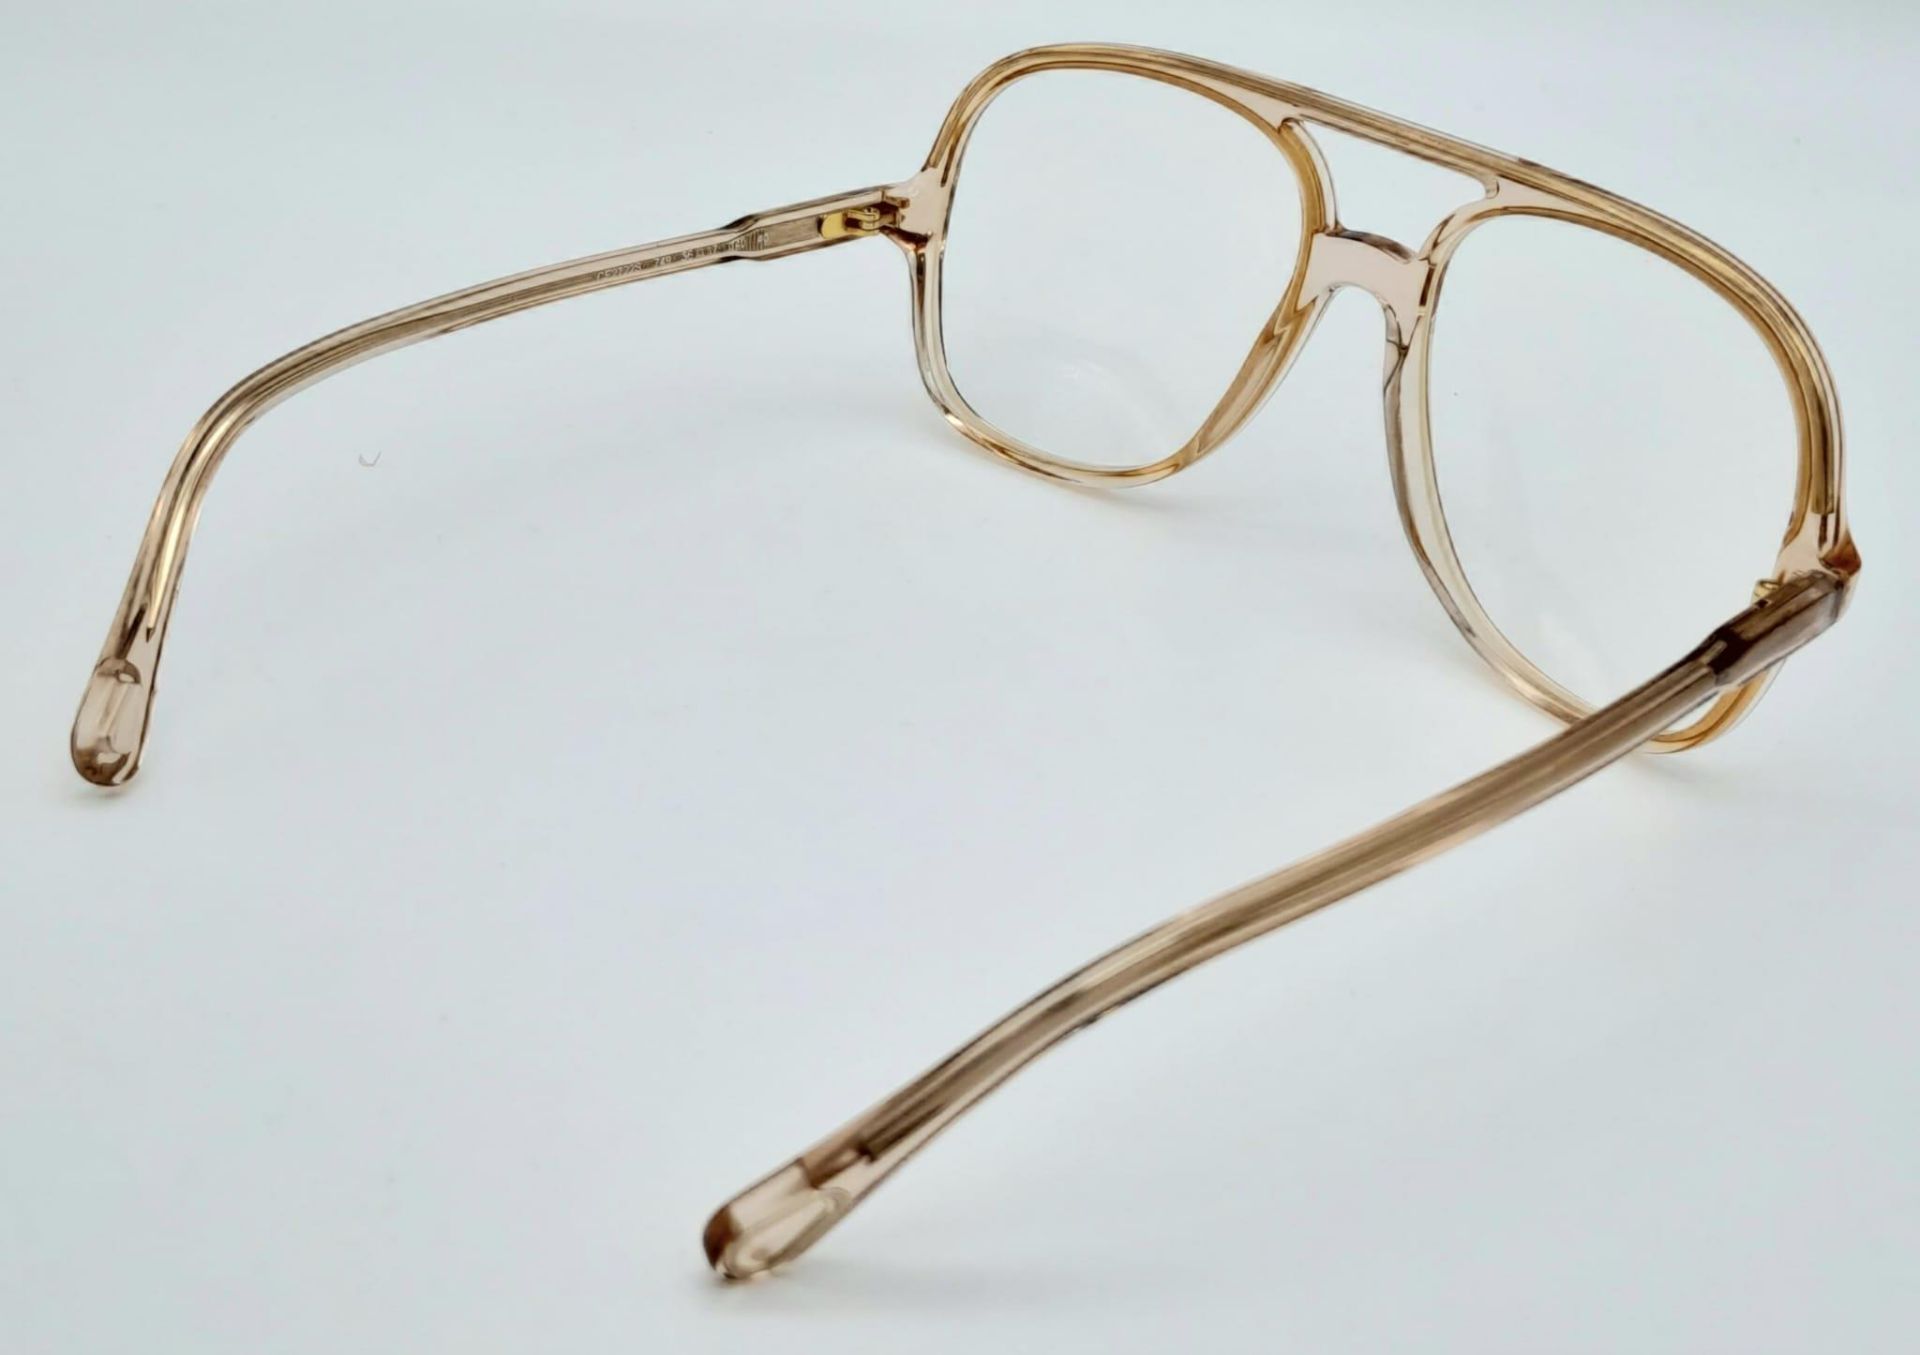 Chloe 'Patty' Eyeglasses. Large navigator shape/style and nude colour, Patty brings a 70s-inspired - Bild 6 aus 11